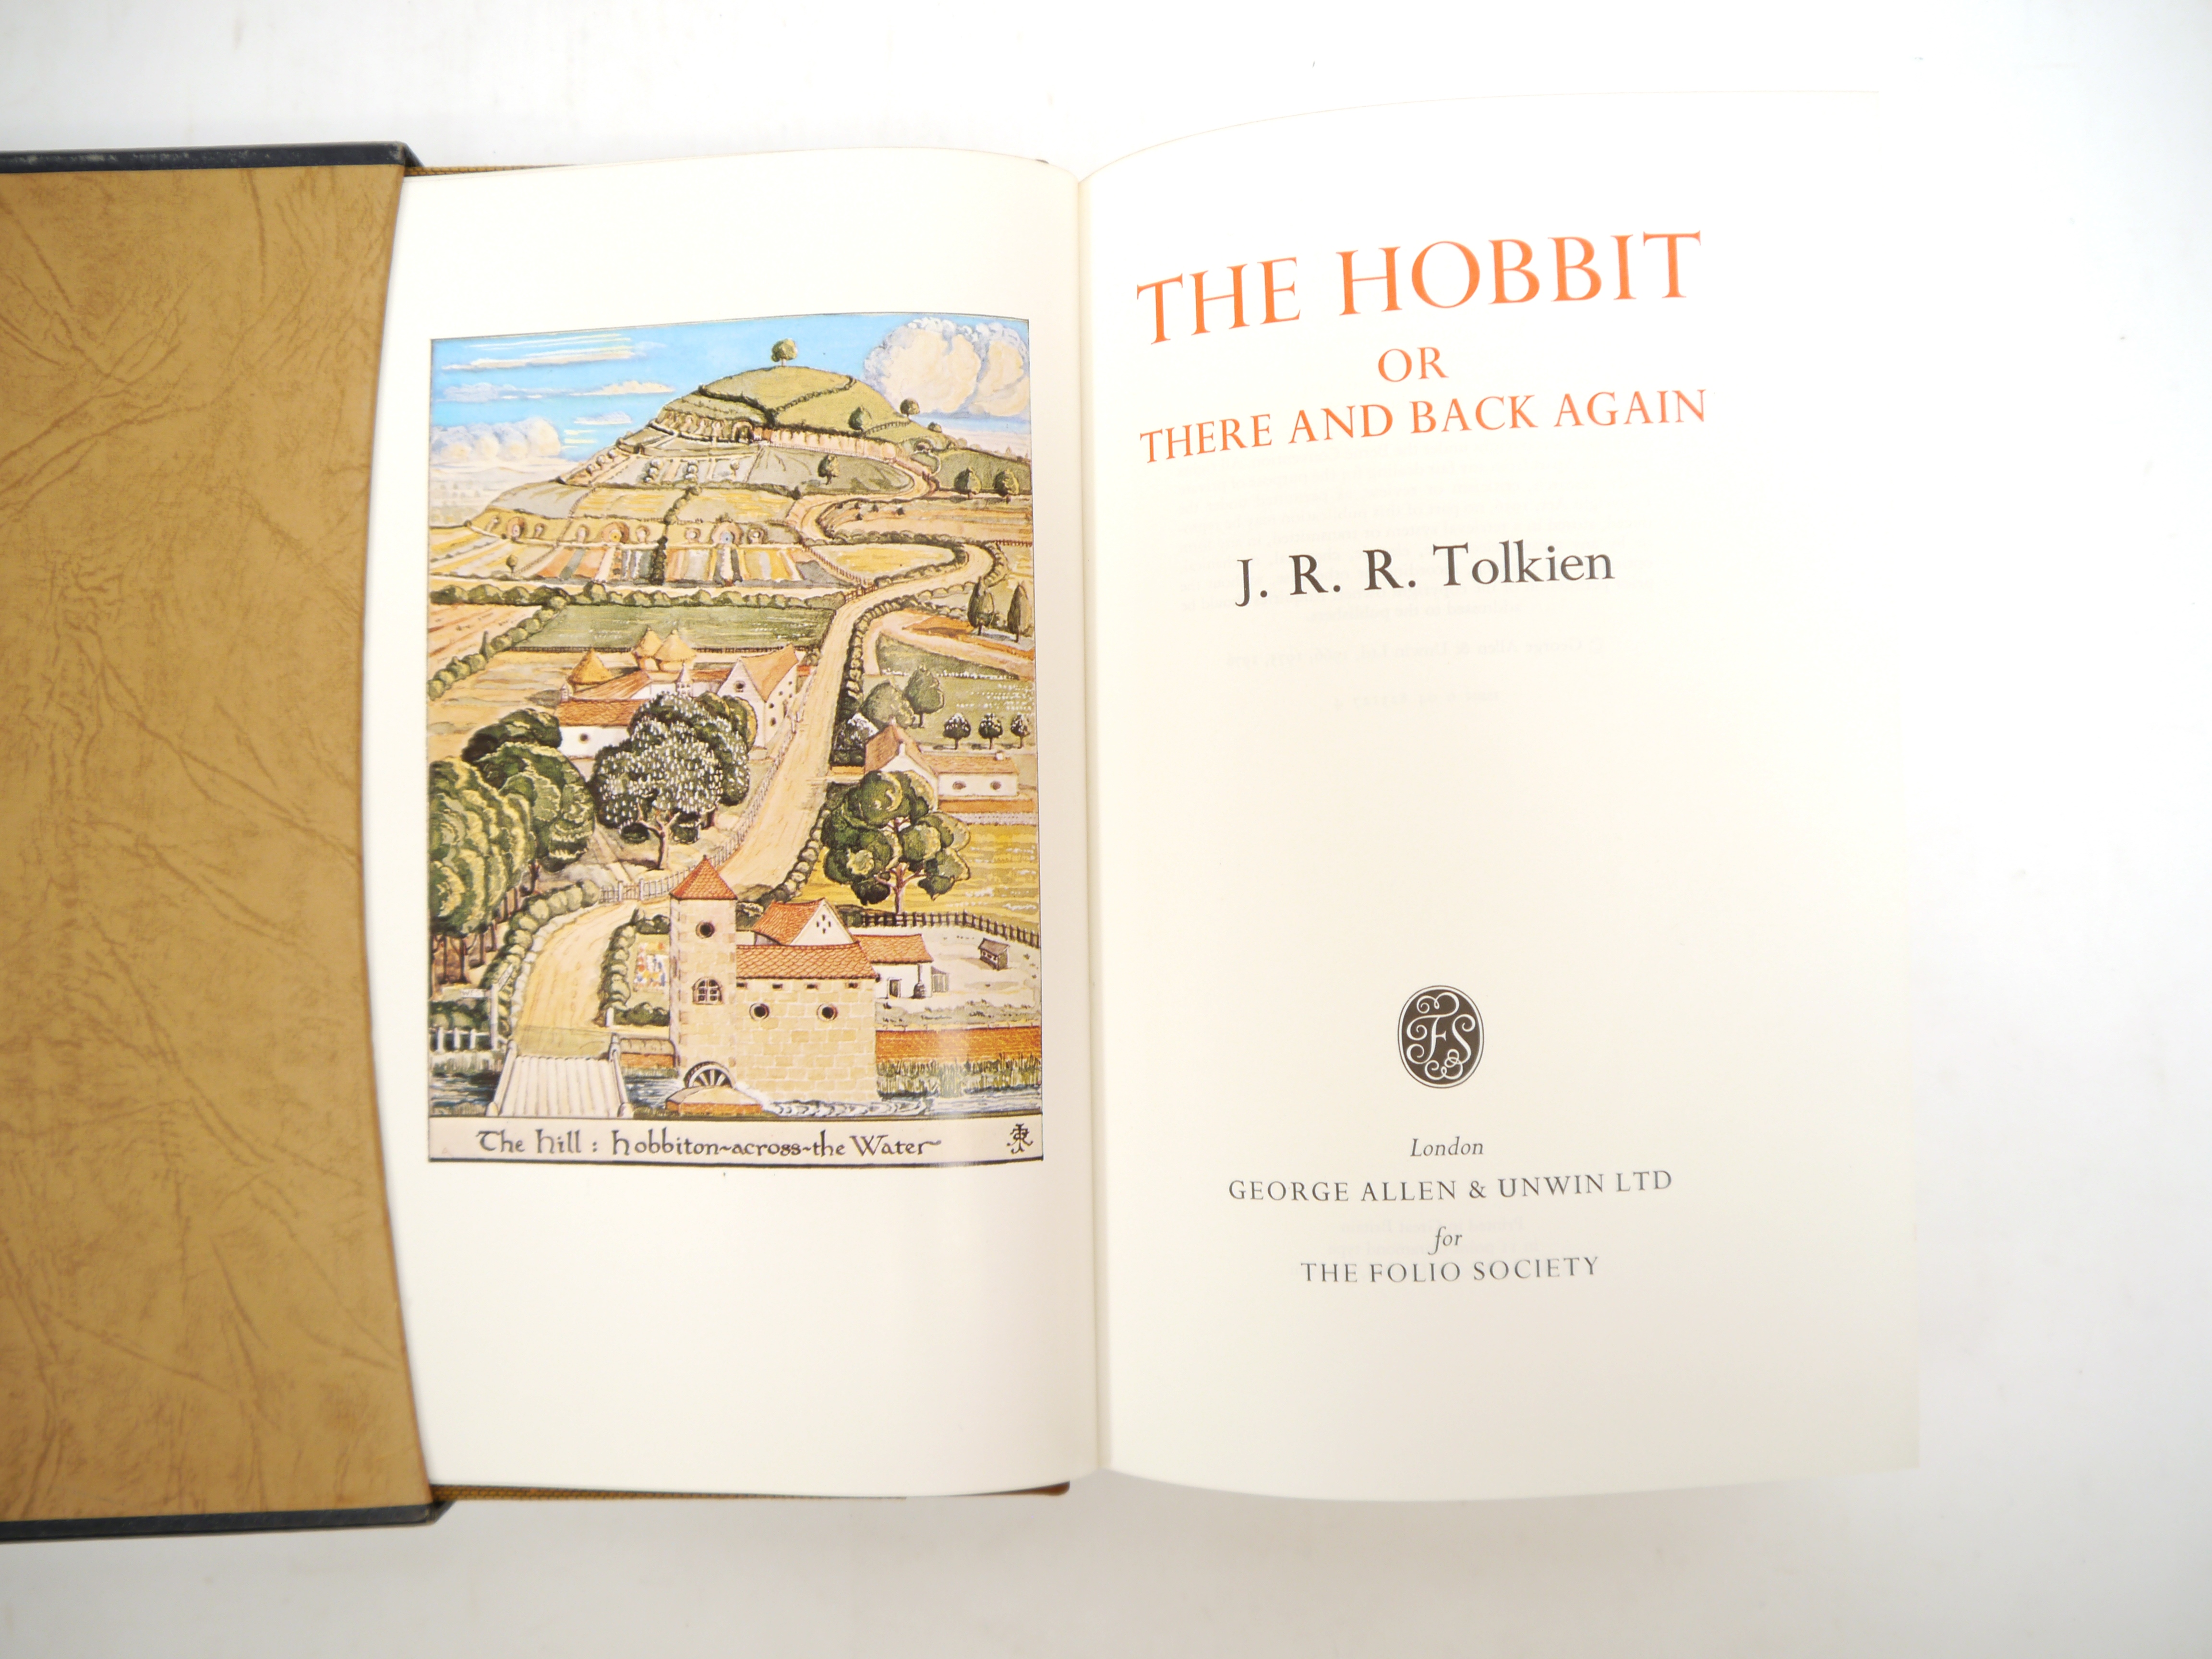 J.R.R. Tolkien: 'The Hobbit, or There and Back Again', London, George Allen & Unwin Ltd. for the - Image 3 of 6